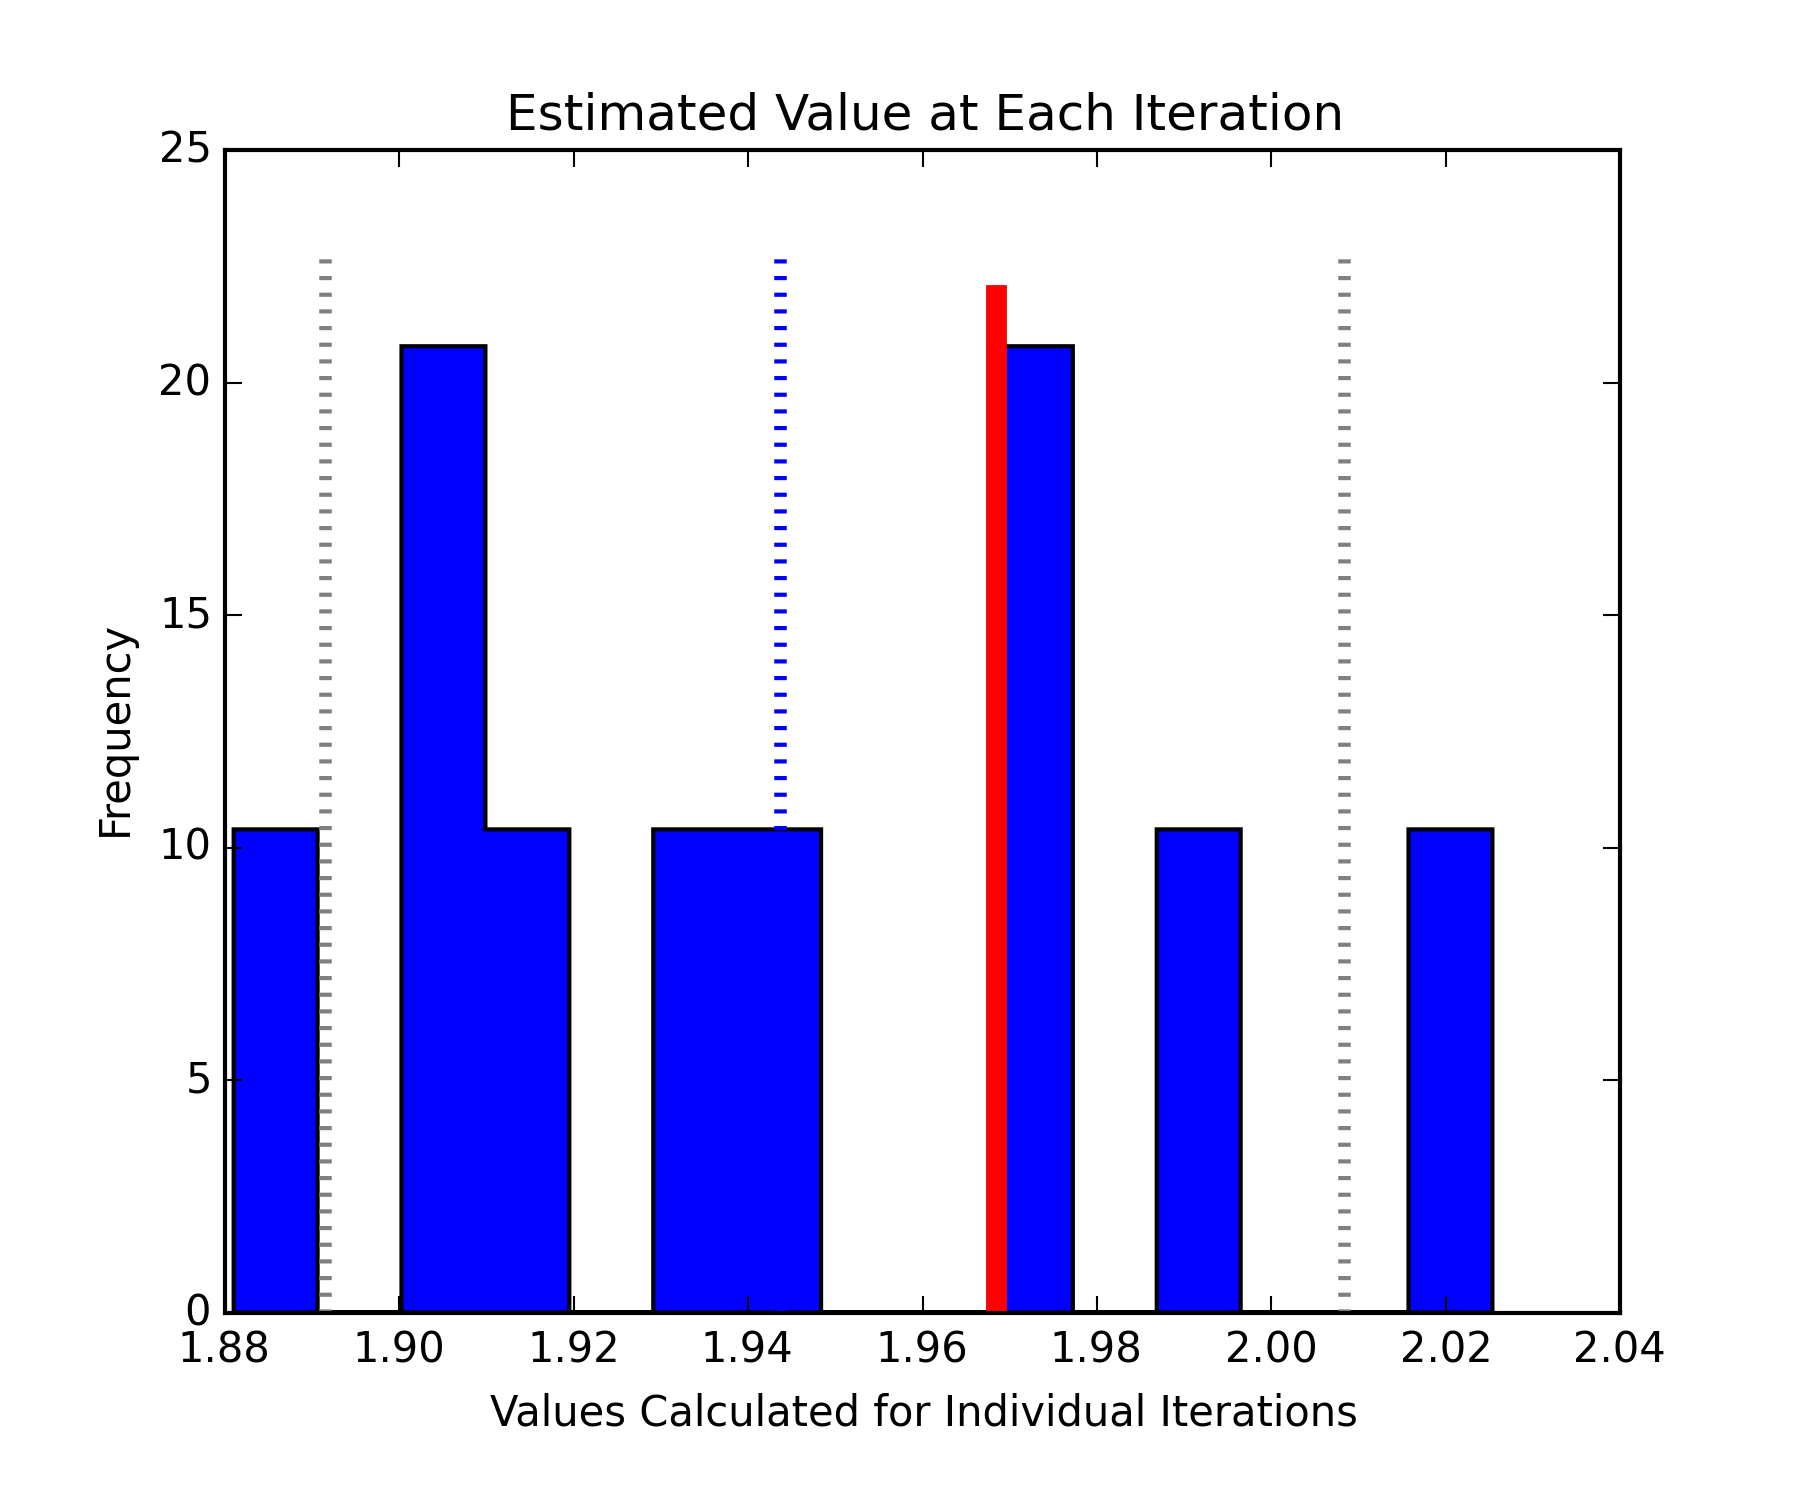 Estimated value of each iteration